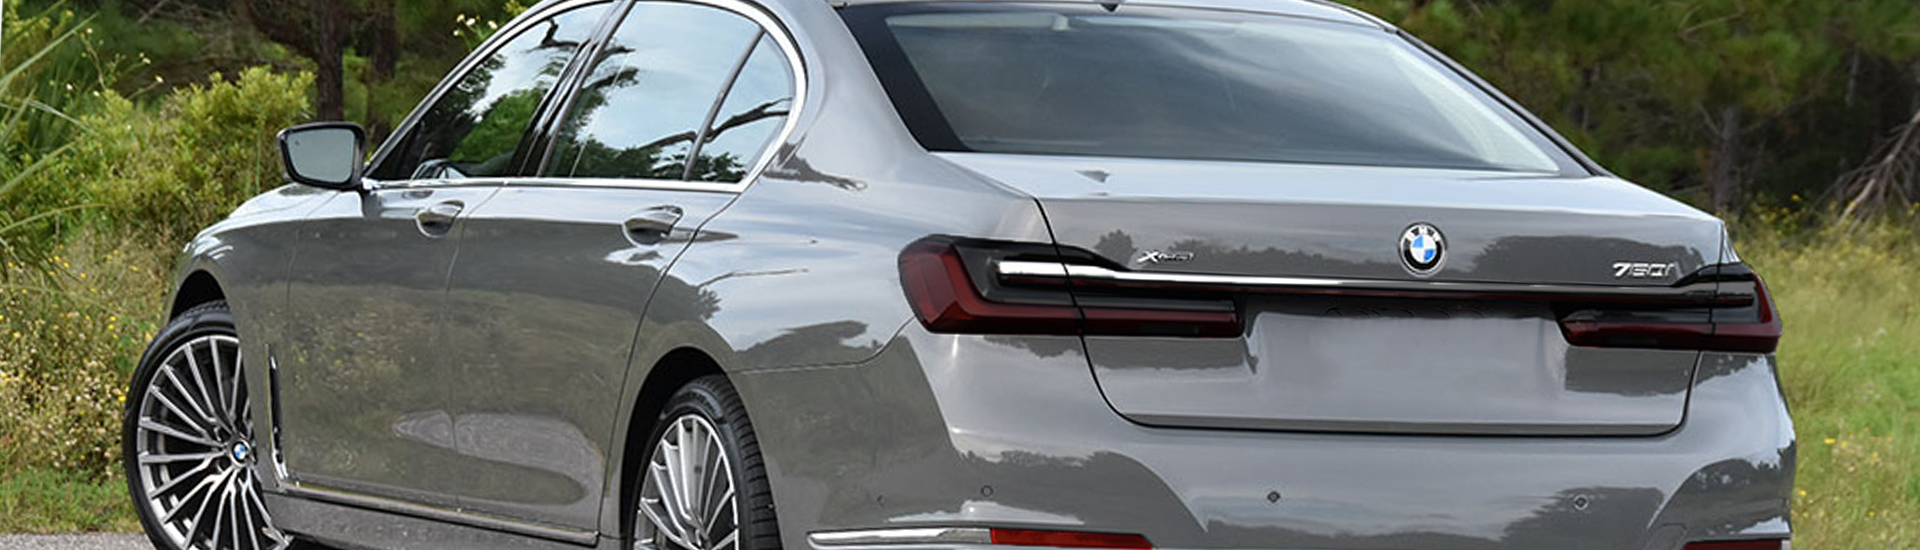 BMW 7-Series Tail Light Tint Covers